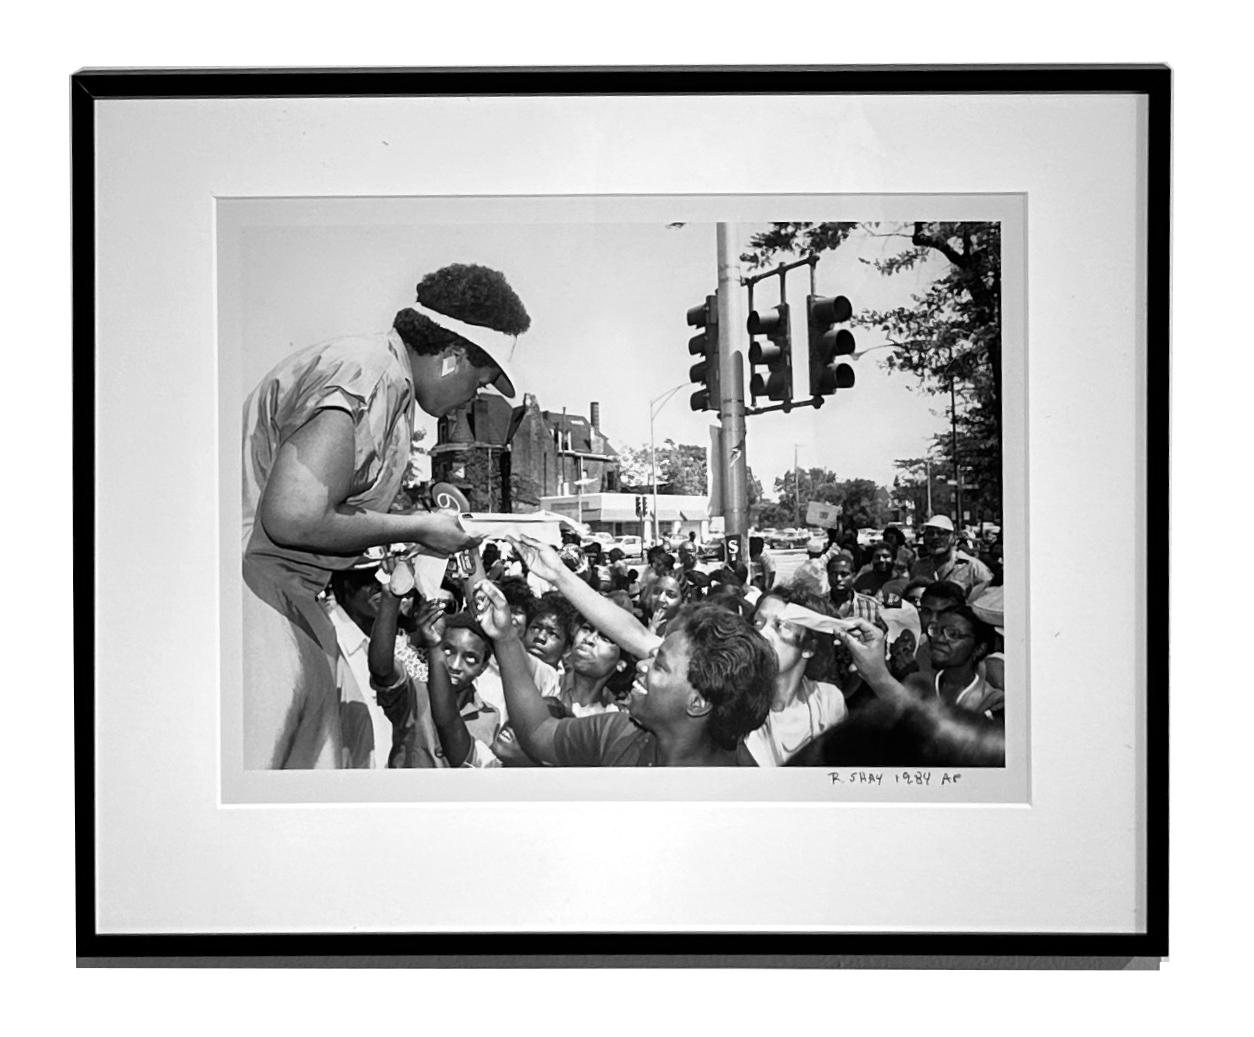 Oprah Winfrey at the Bud Billiken Parade in Chicago, 1984 - Black & White Photo - Contemporary Photograph by Richard Shay